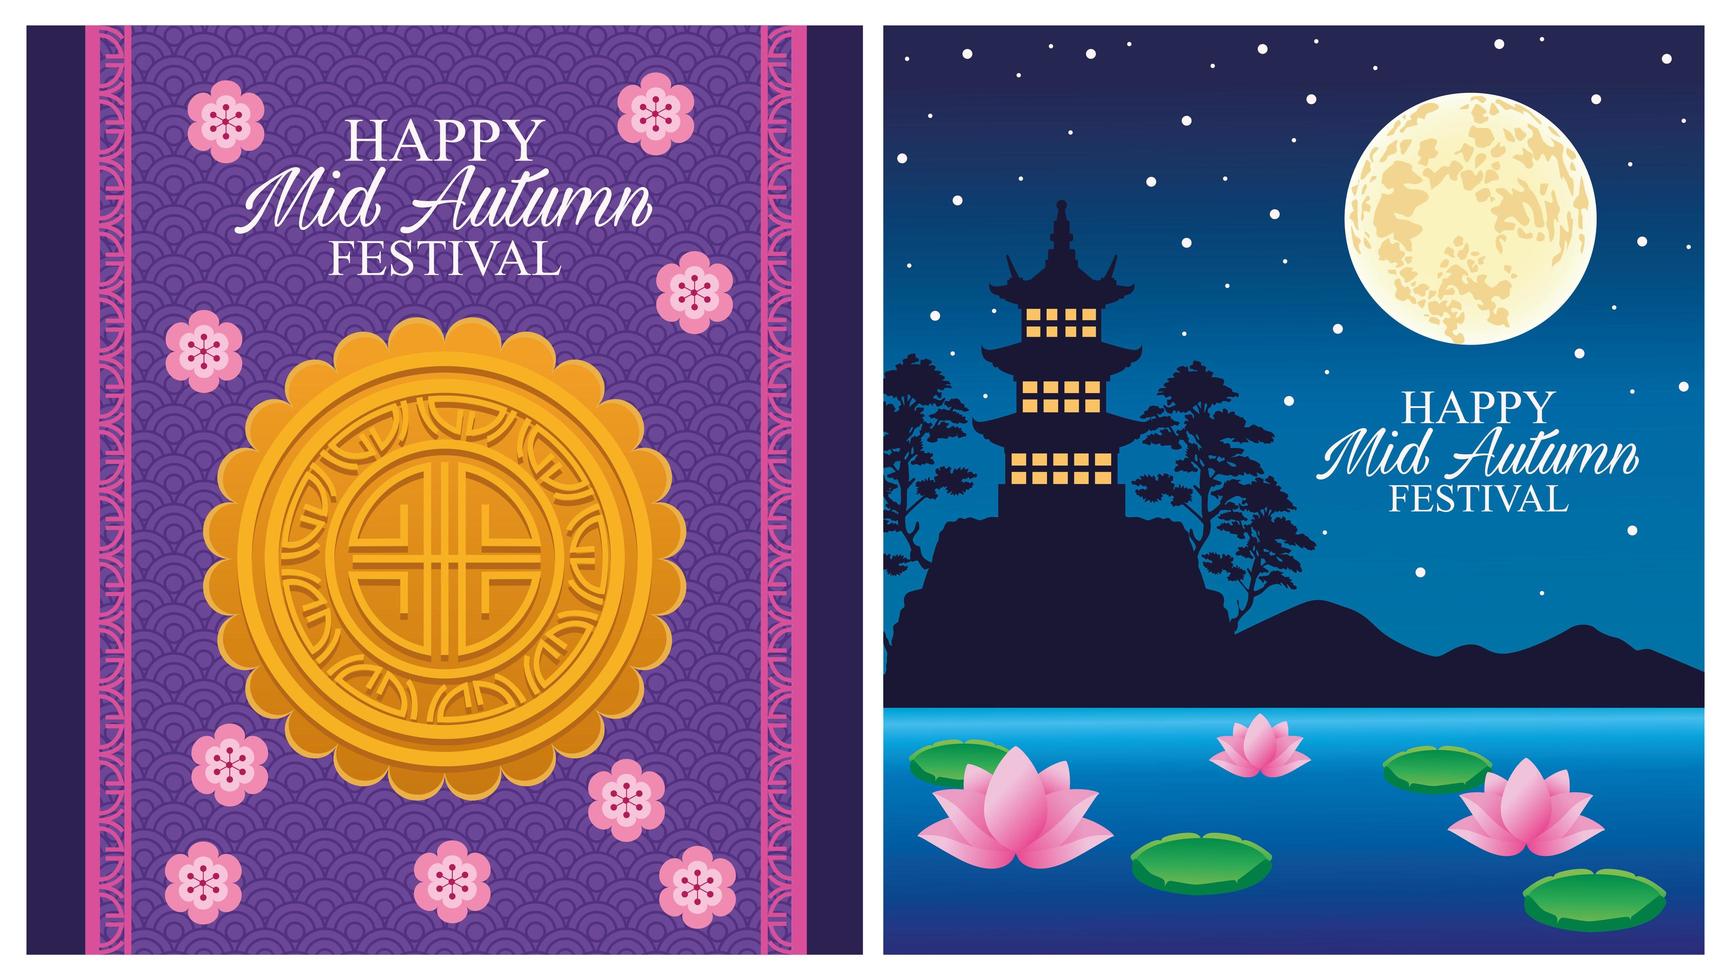 happy mid autumn festival card with castle and moon vector